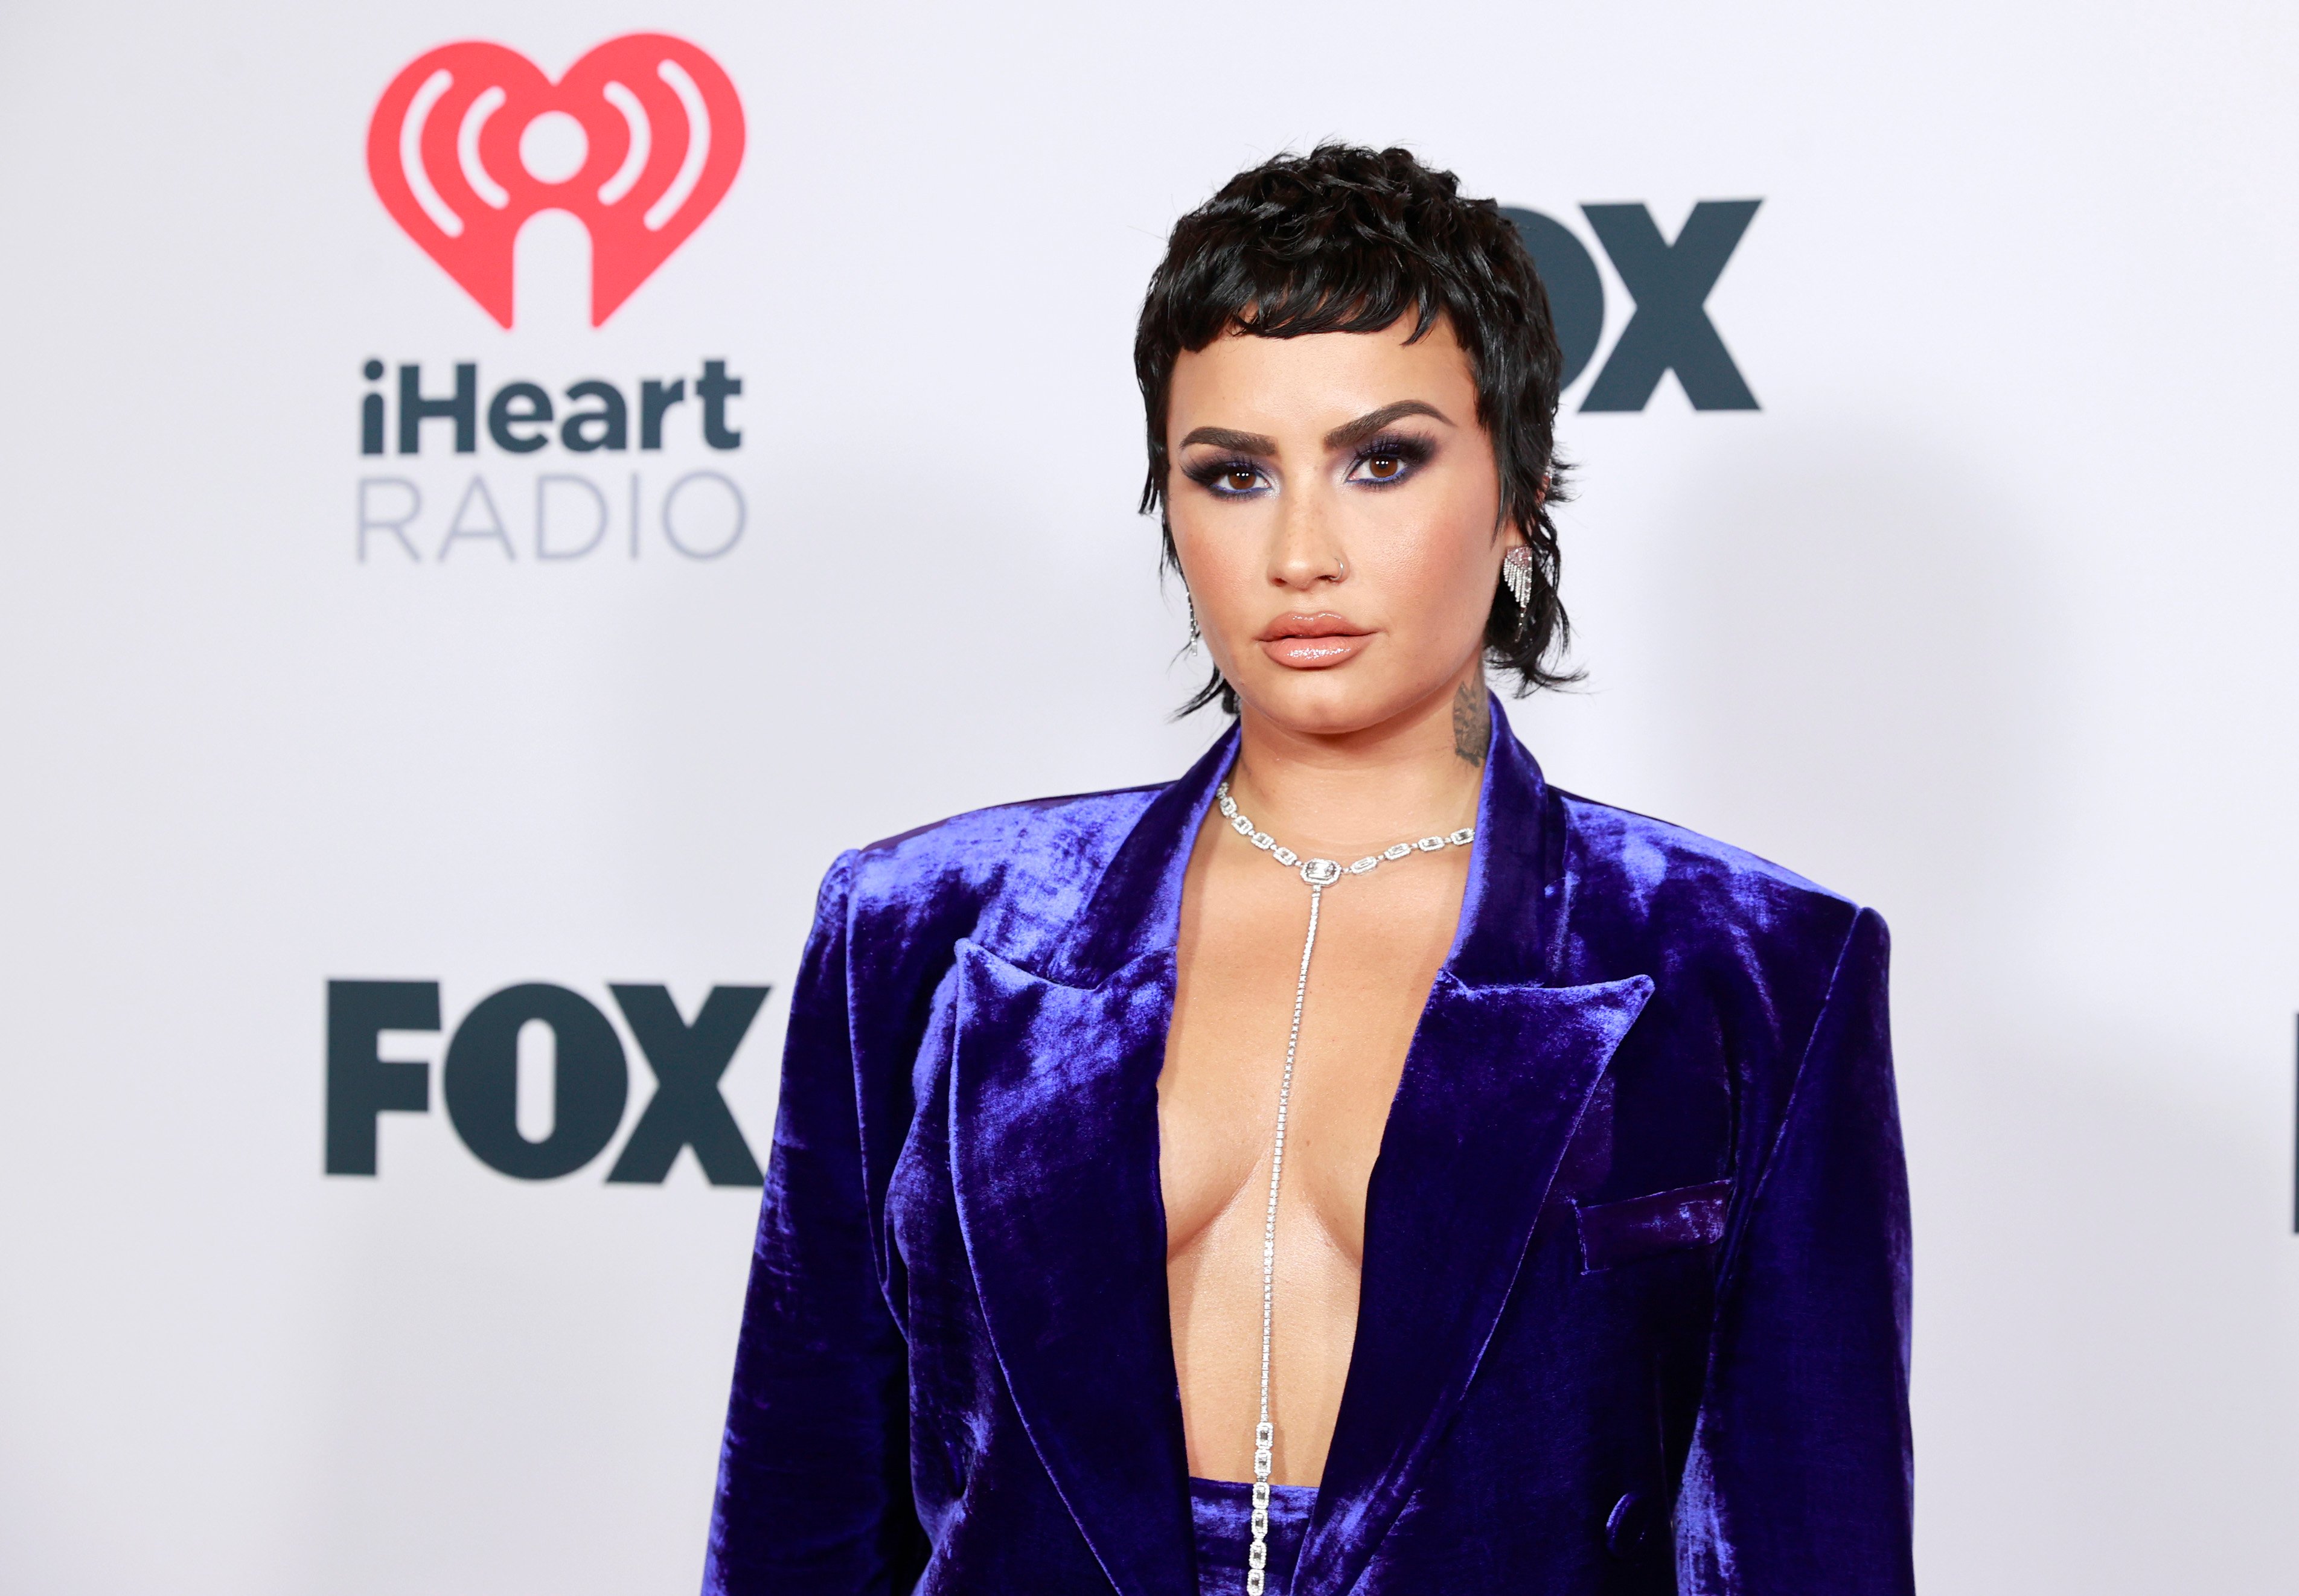 Demi Lovato posing for a picture in a purple suit.